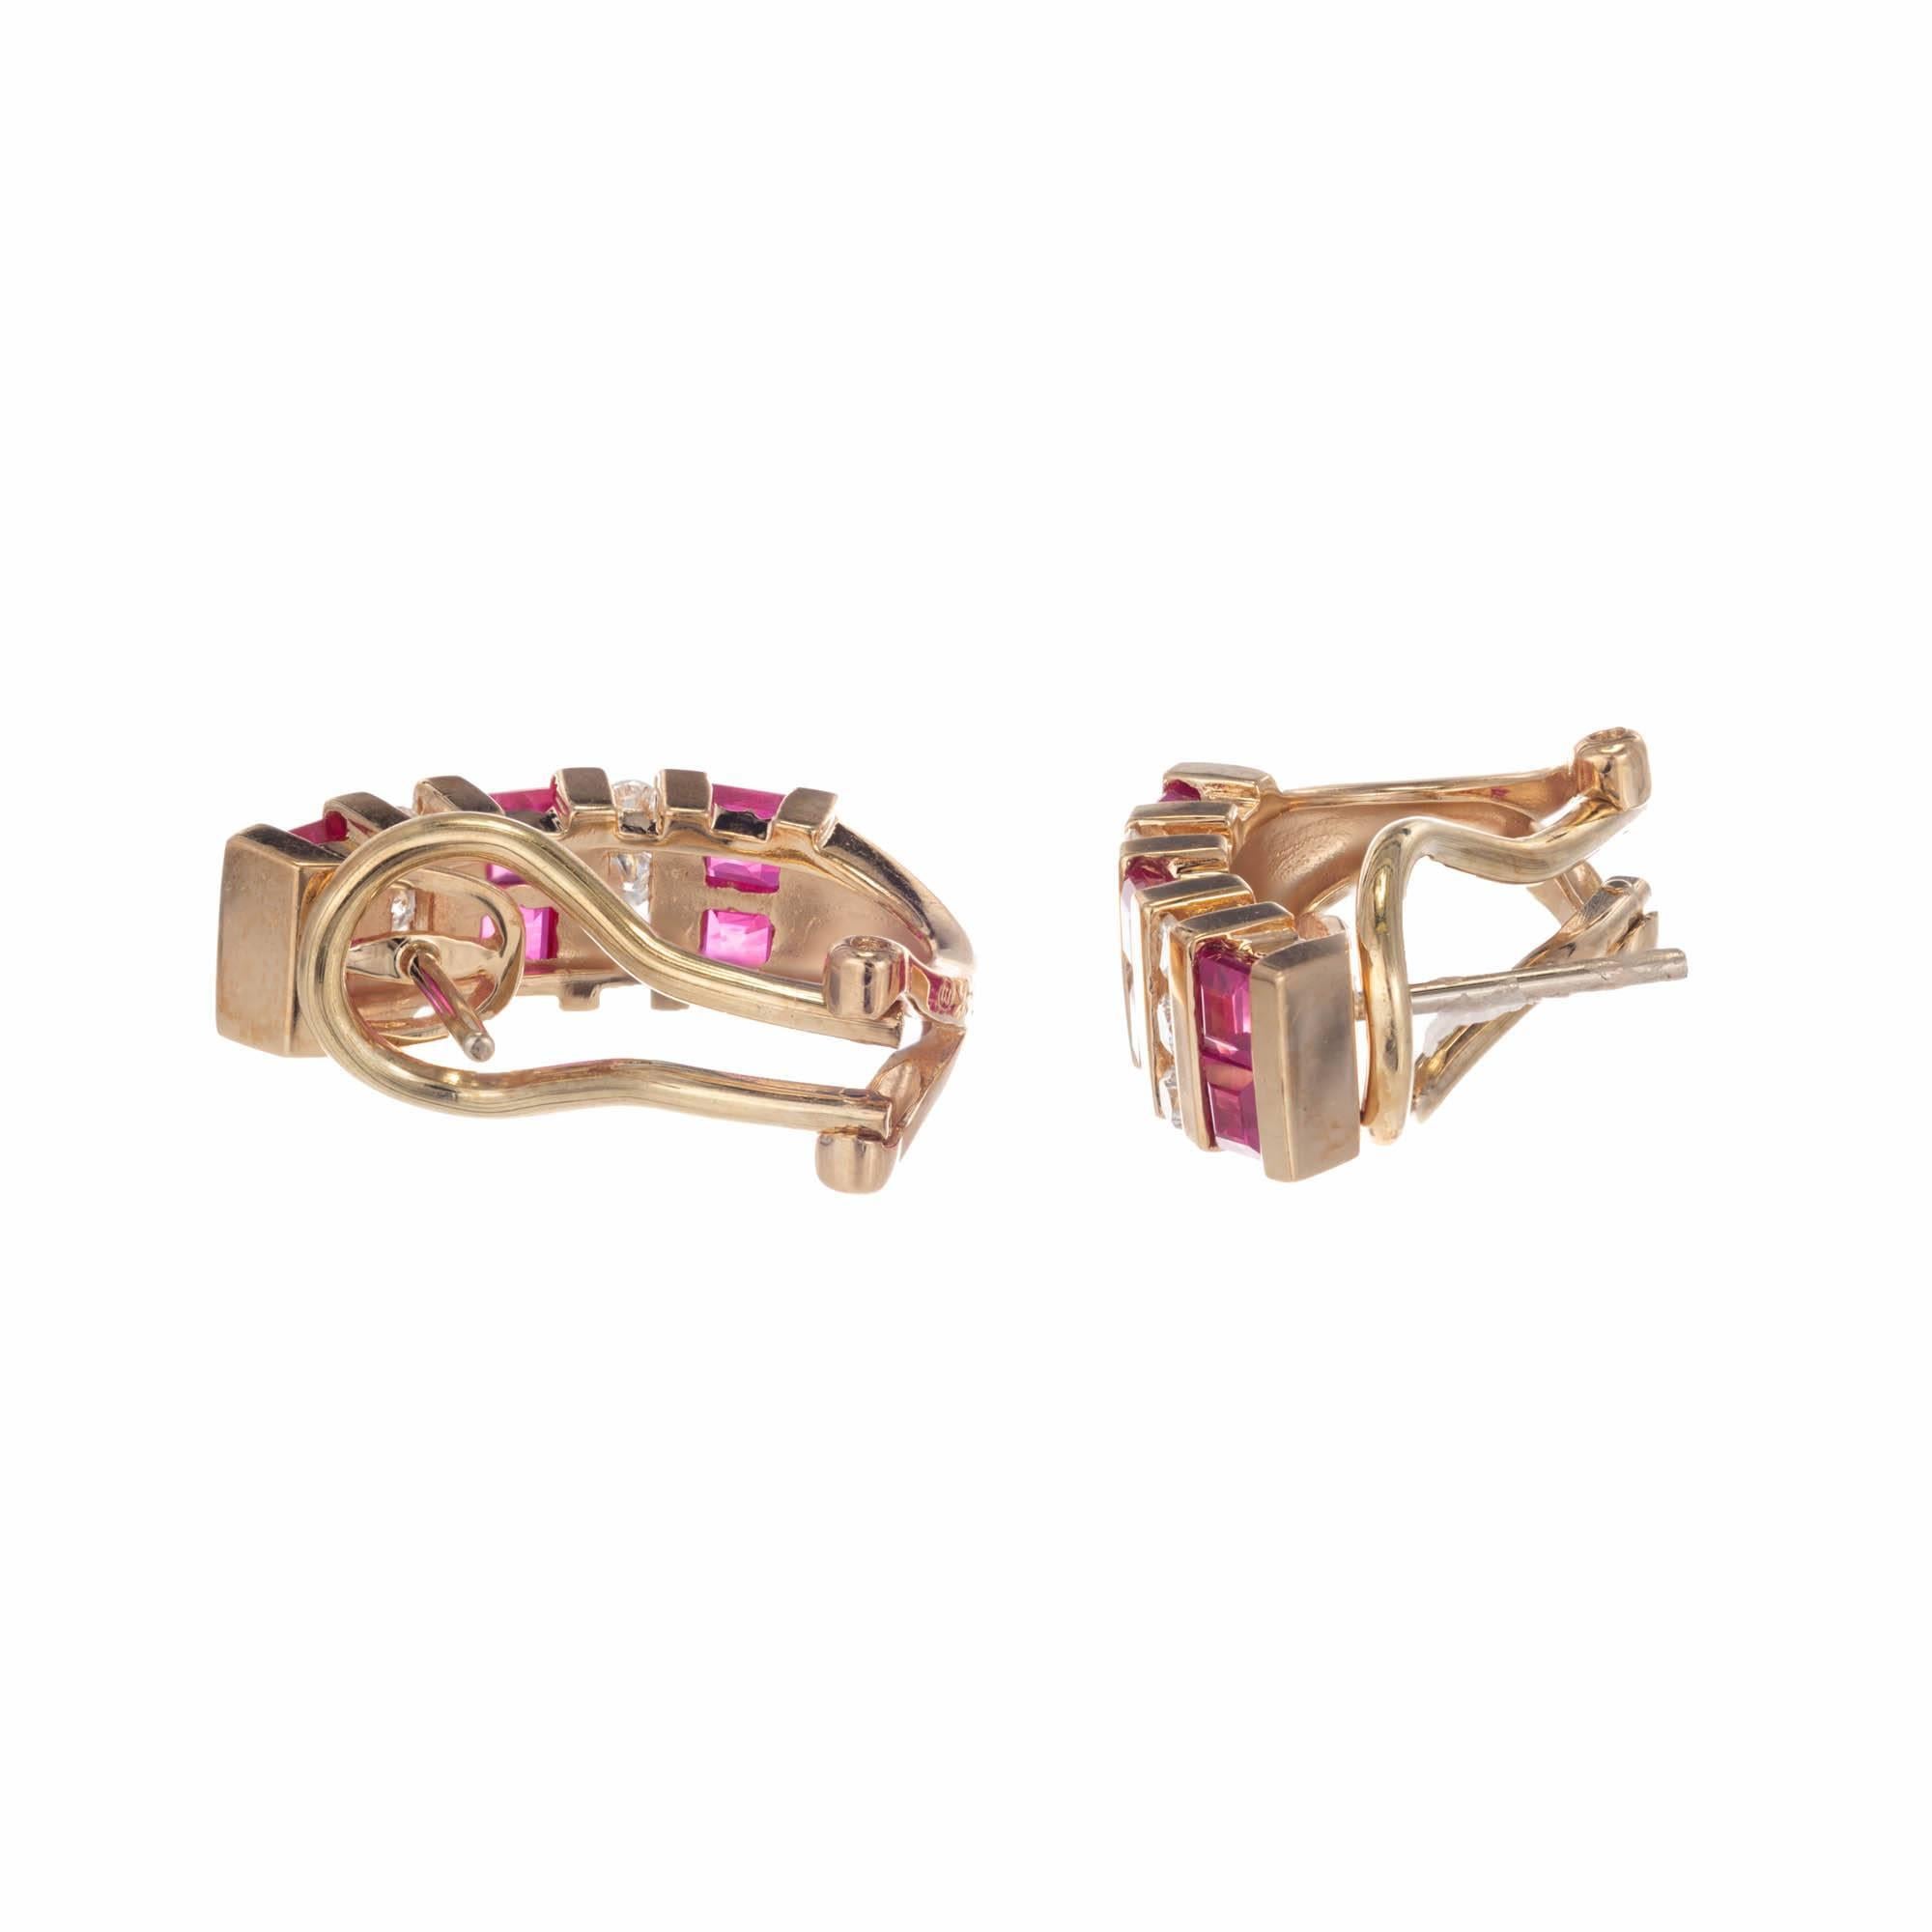 14k Yellow gold ruby and diamond earrings. Square cut rubies are channel set in a row and divided by a row of channel set round diamonds in a half hoop design with a post and omega back.

12 square step cut rubies 2.5mm Approximate .84 carats
12